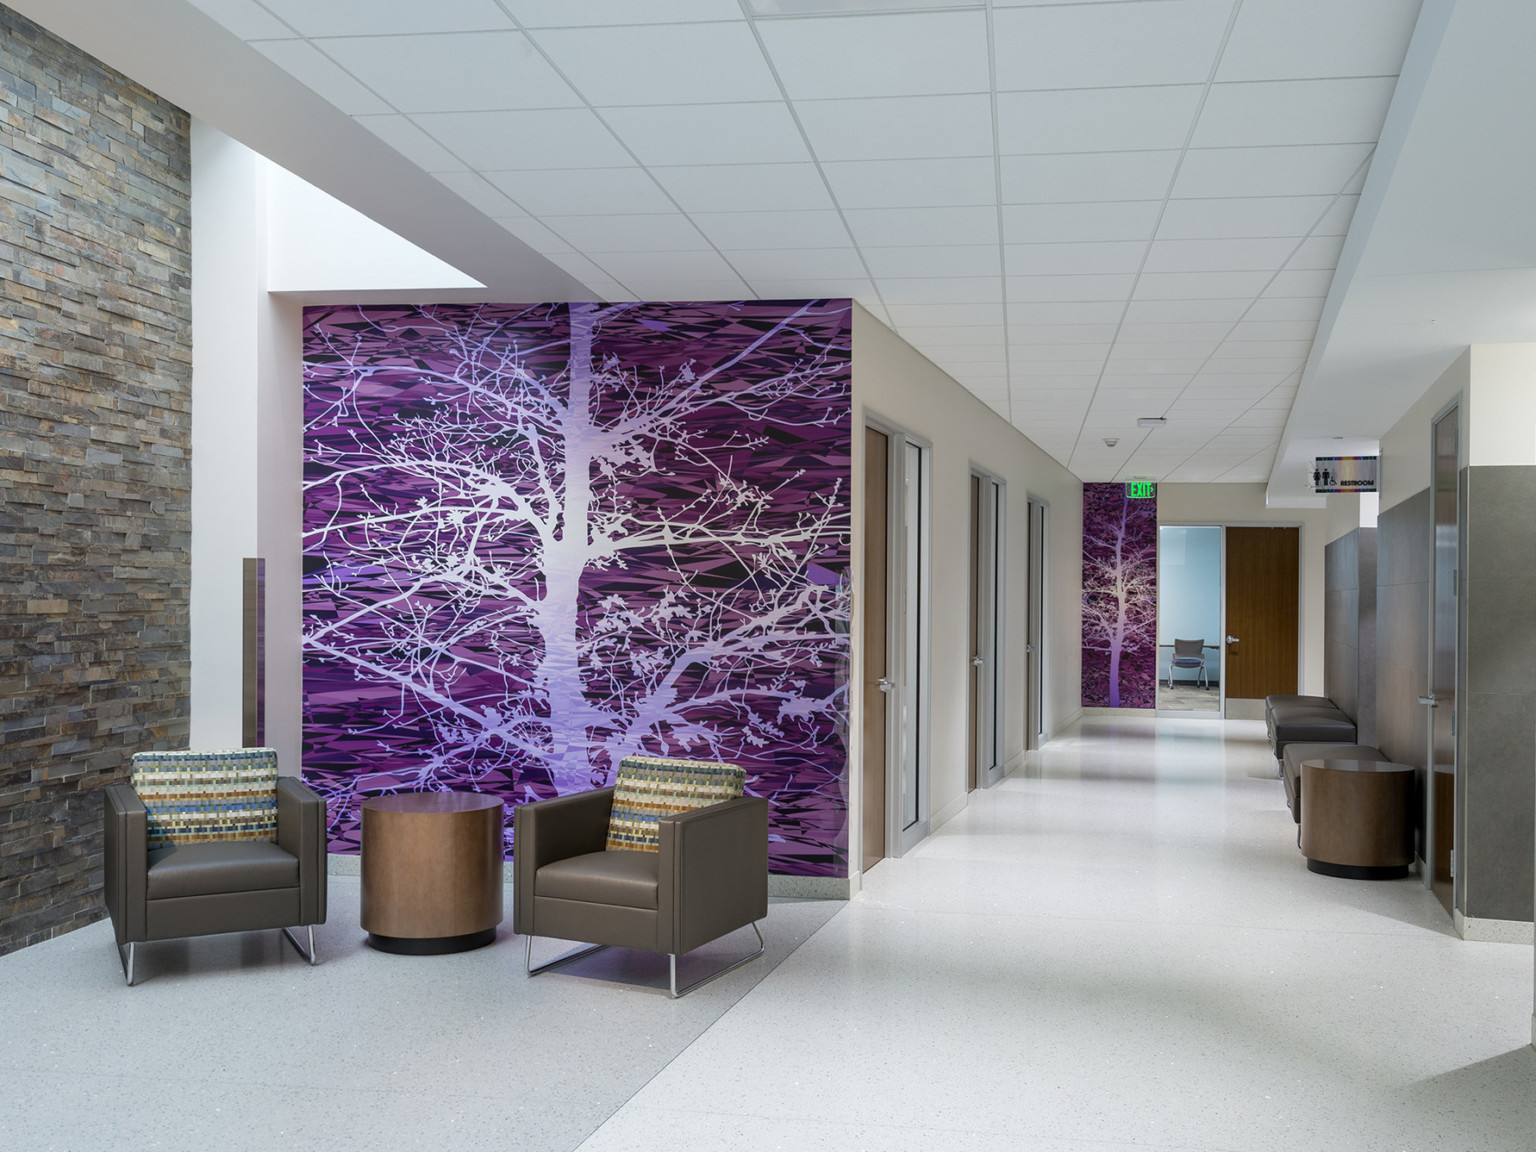 Seating area in front of purple abstract mural at end of hallway